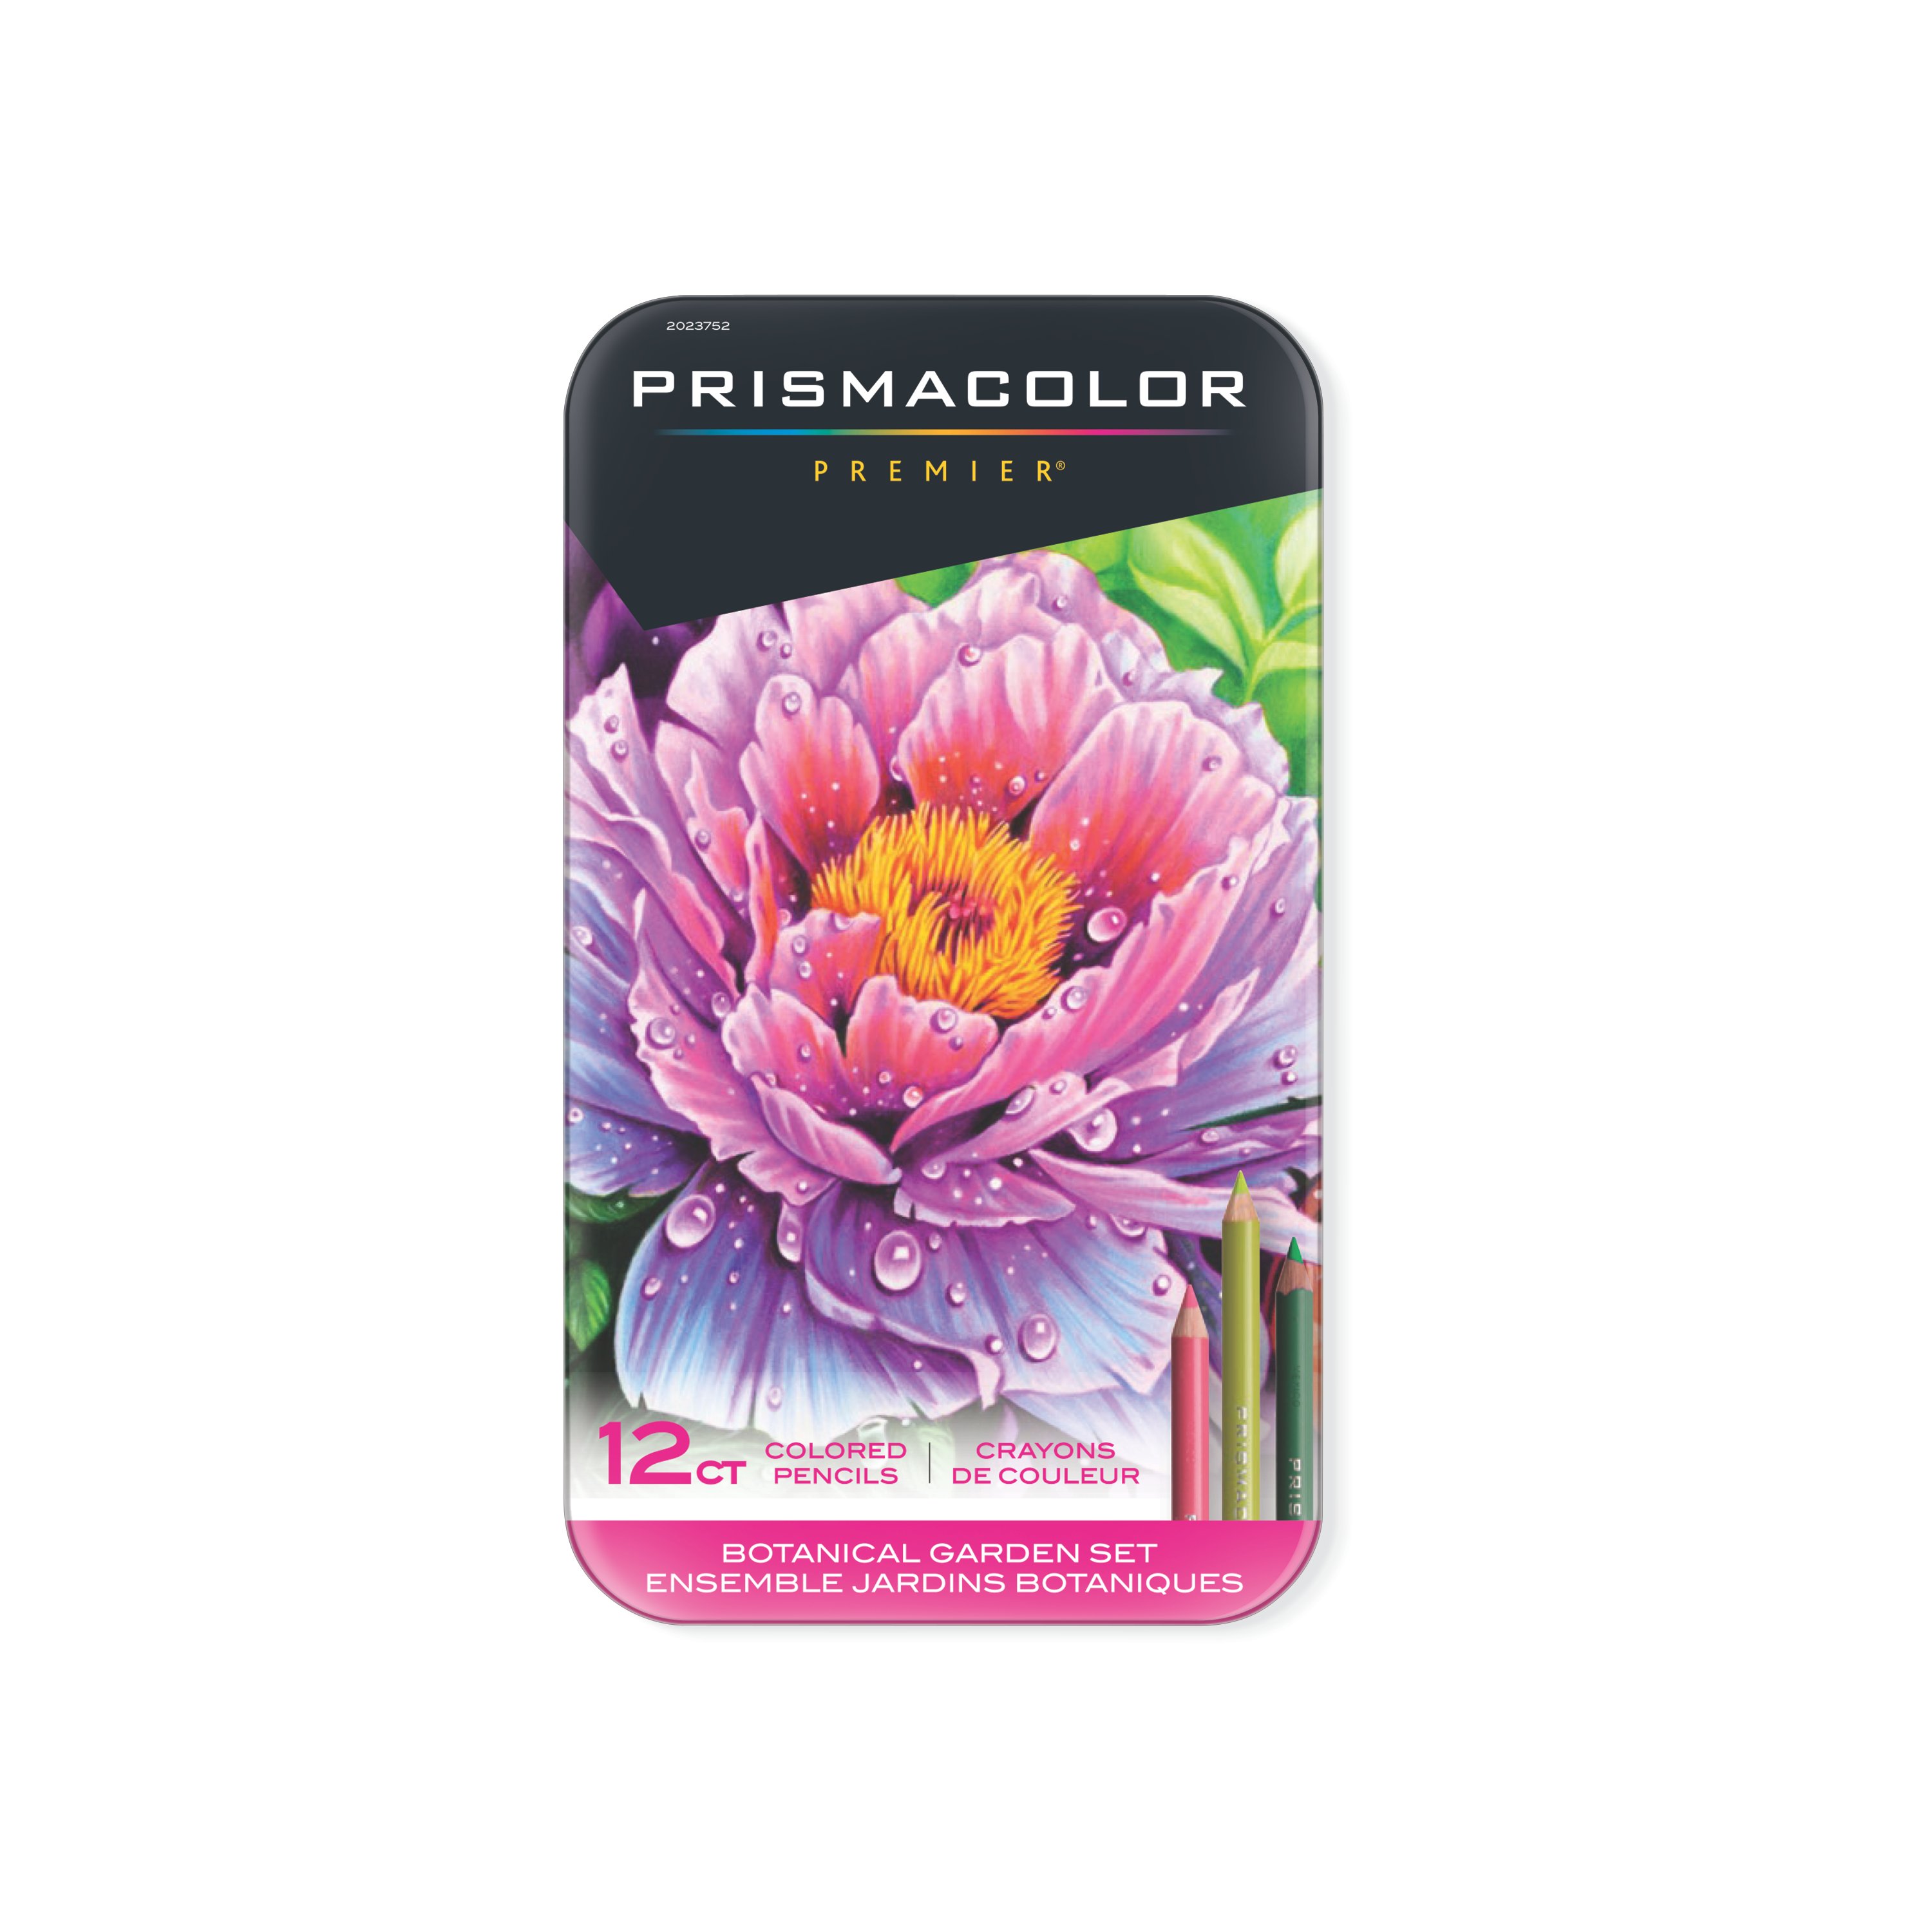 PrismaColor Pencils - KSOF  Karen's School of Fashion Sewing and Fashion  Design in NY and NJ